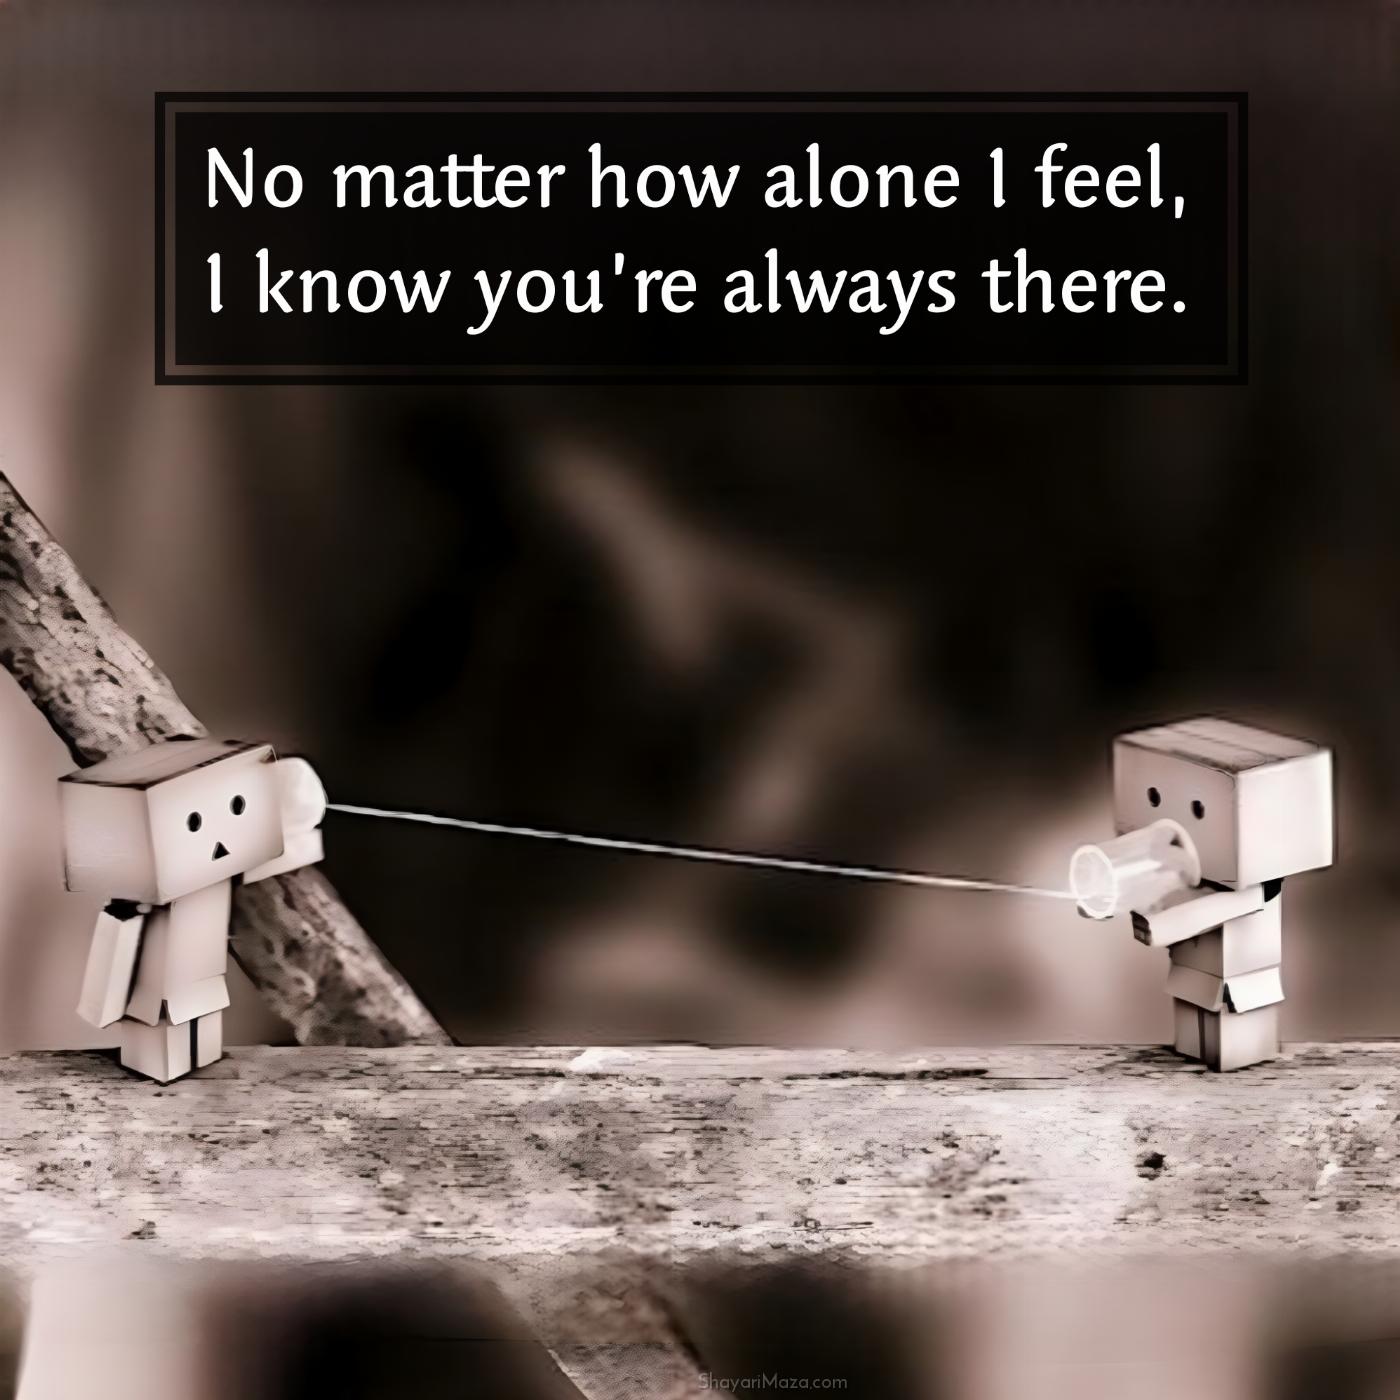 No matter how alone I feel I know youre always there